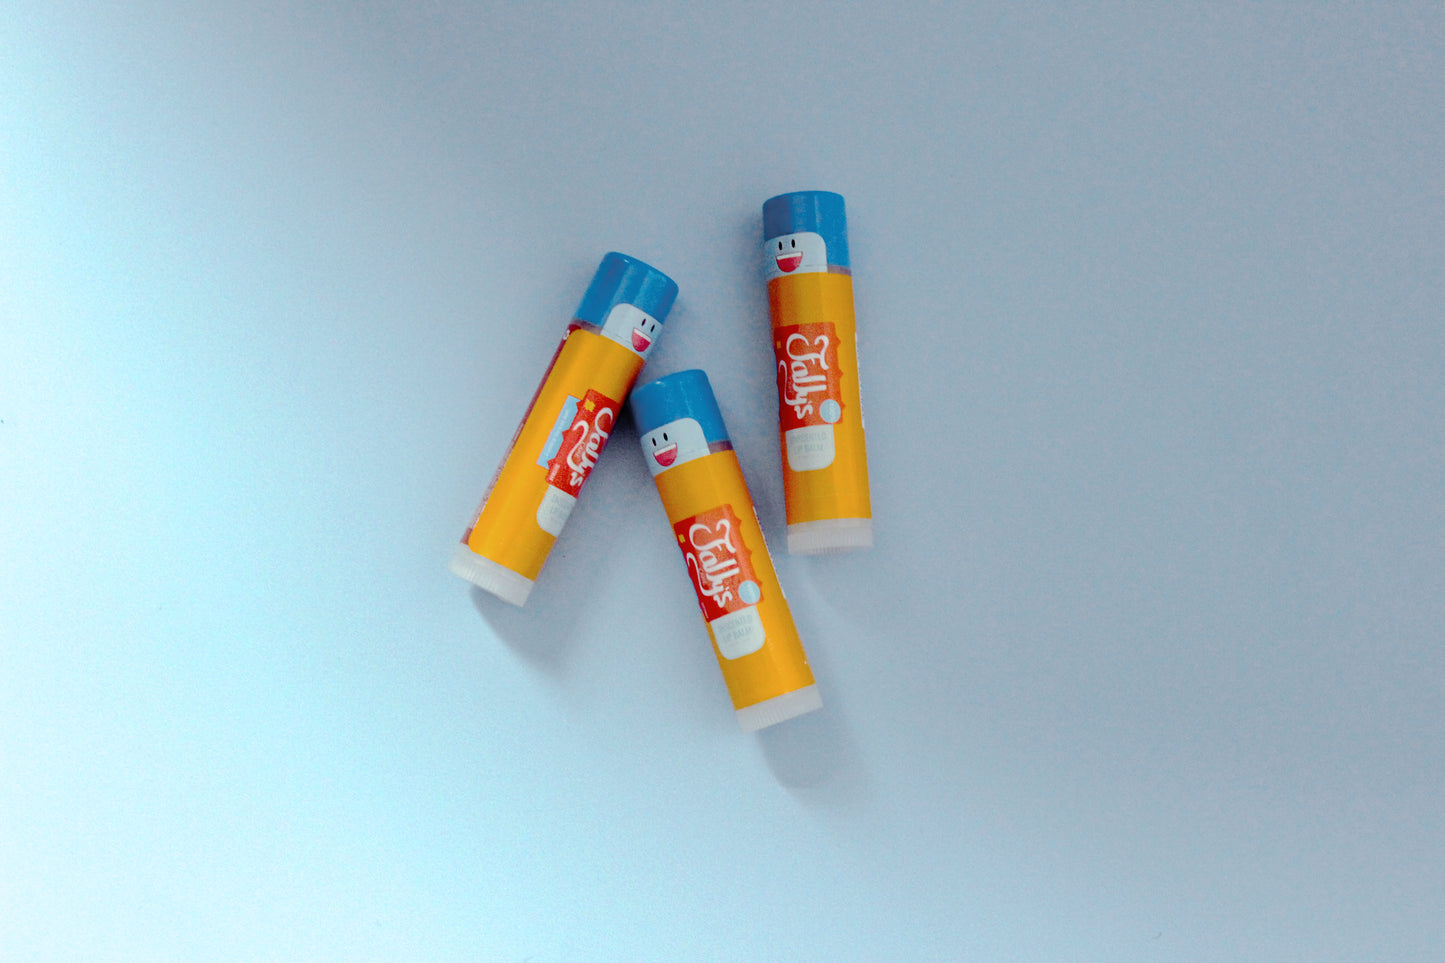 Fally's Care Unscented Lip Balm